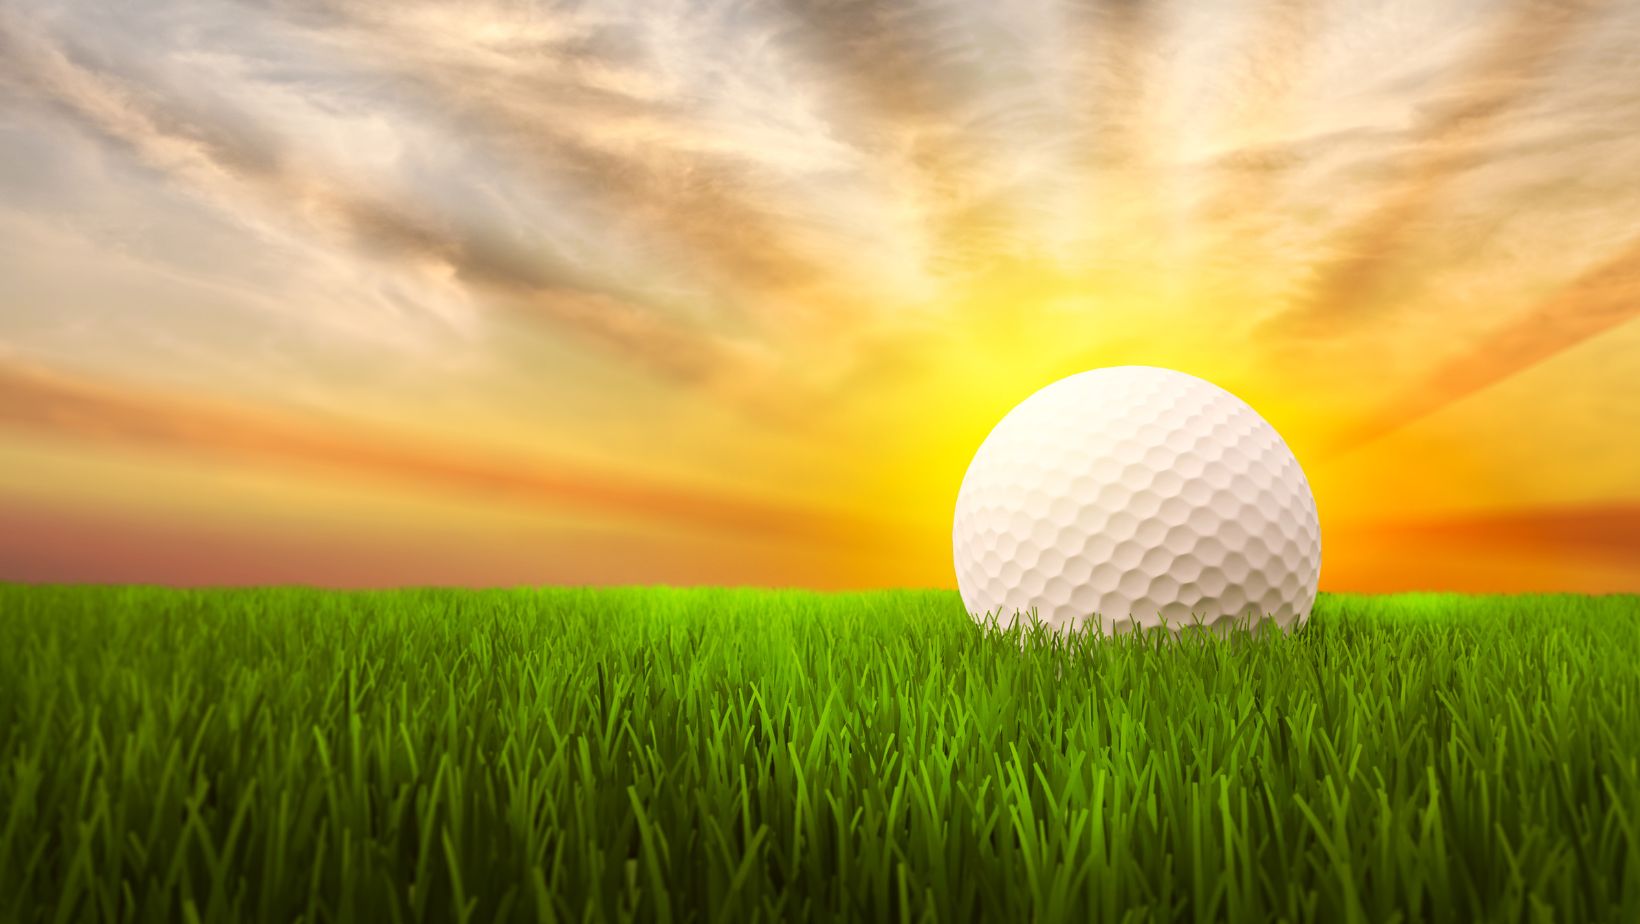 The Rise of Virtual Golf Events and Home Golf Simulators